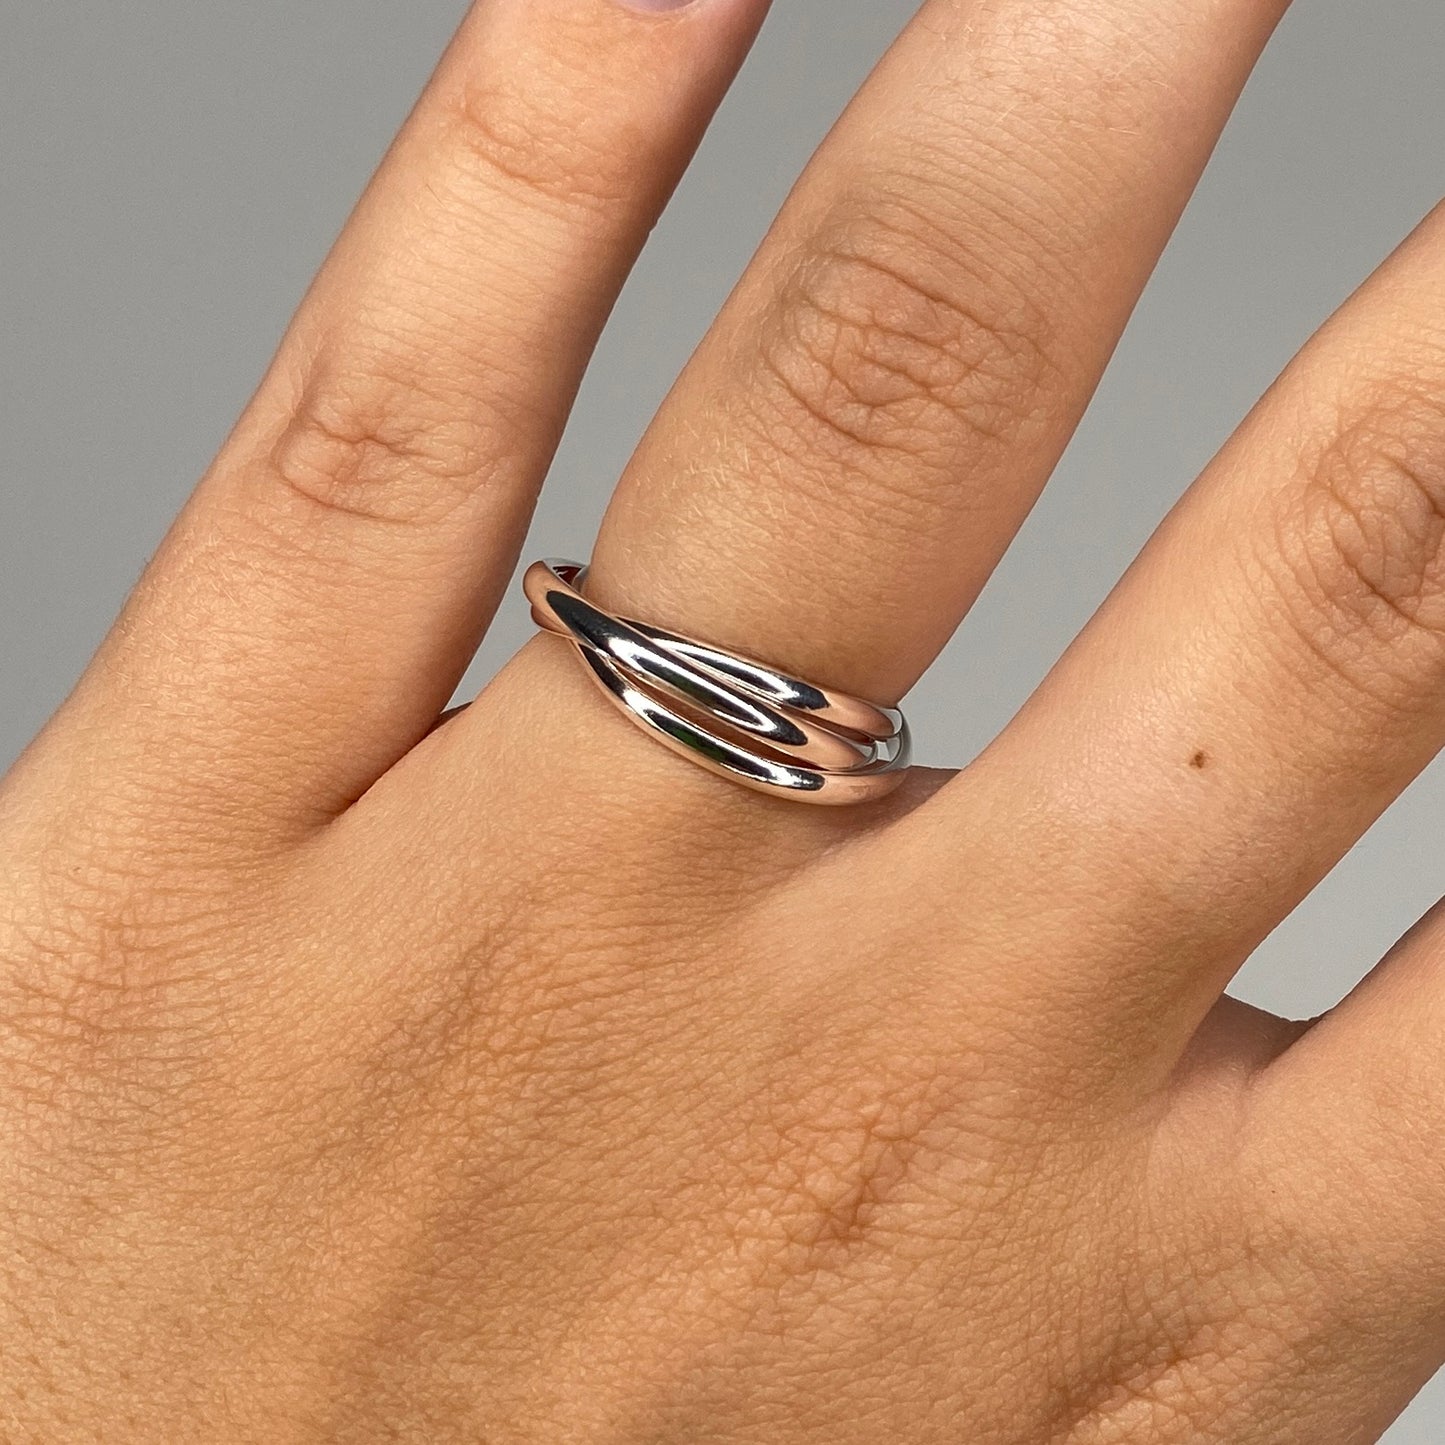 Narrow ring "Trinity" made of silver with three rings